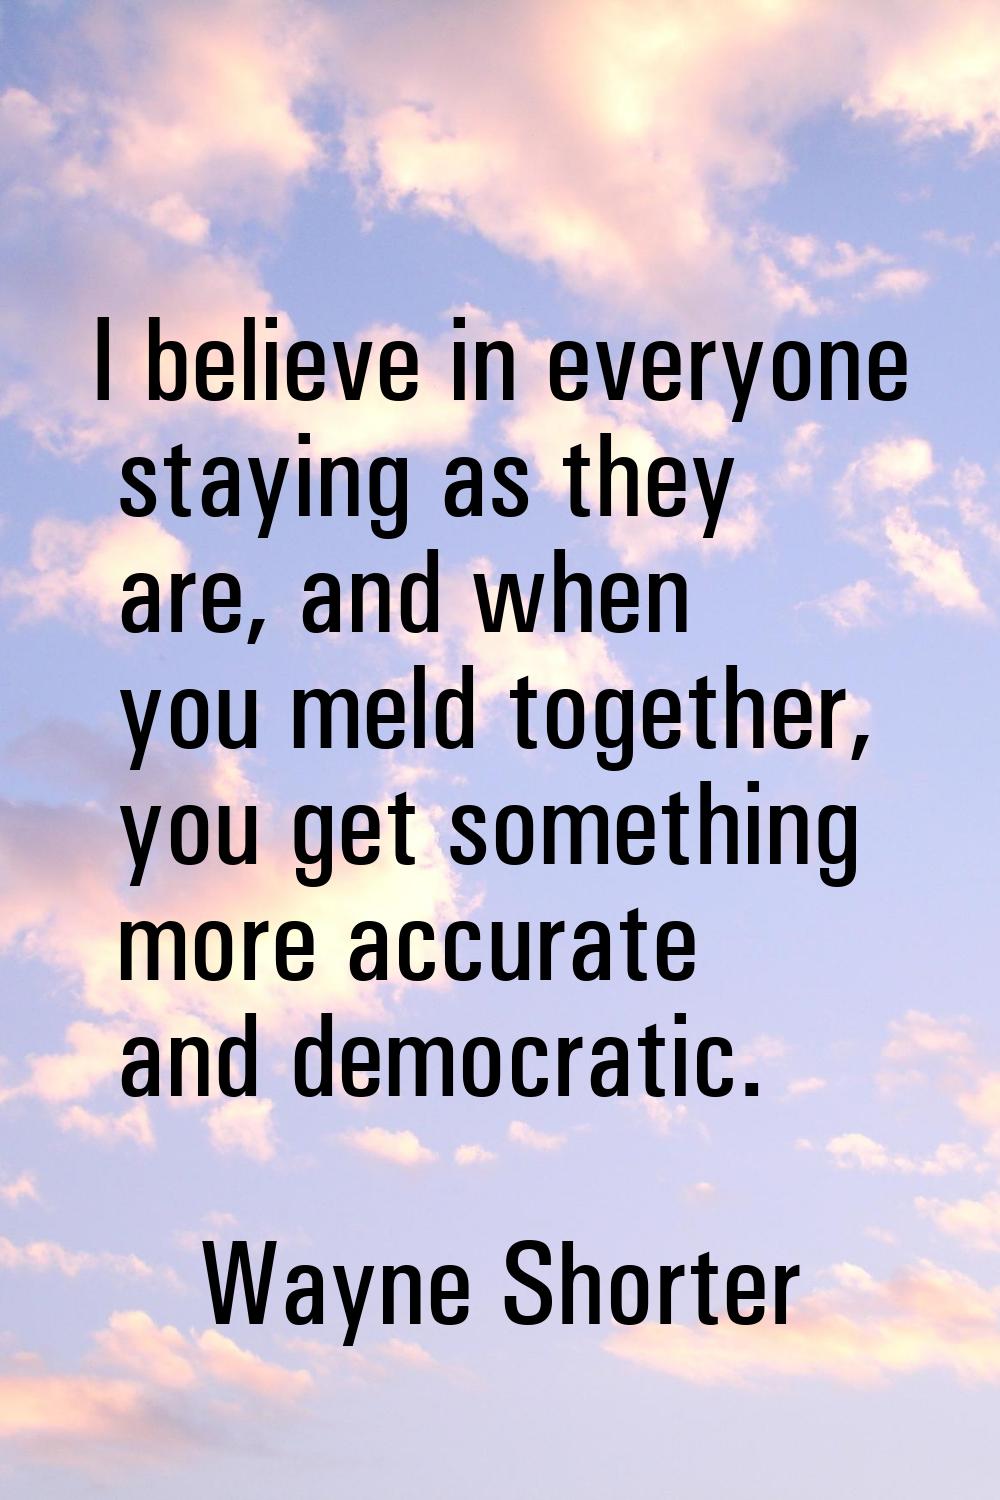 I believe in everyone staying as they are, and when you meld together, you get something more accur